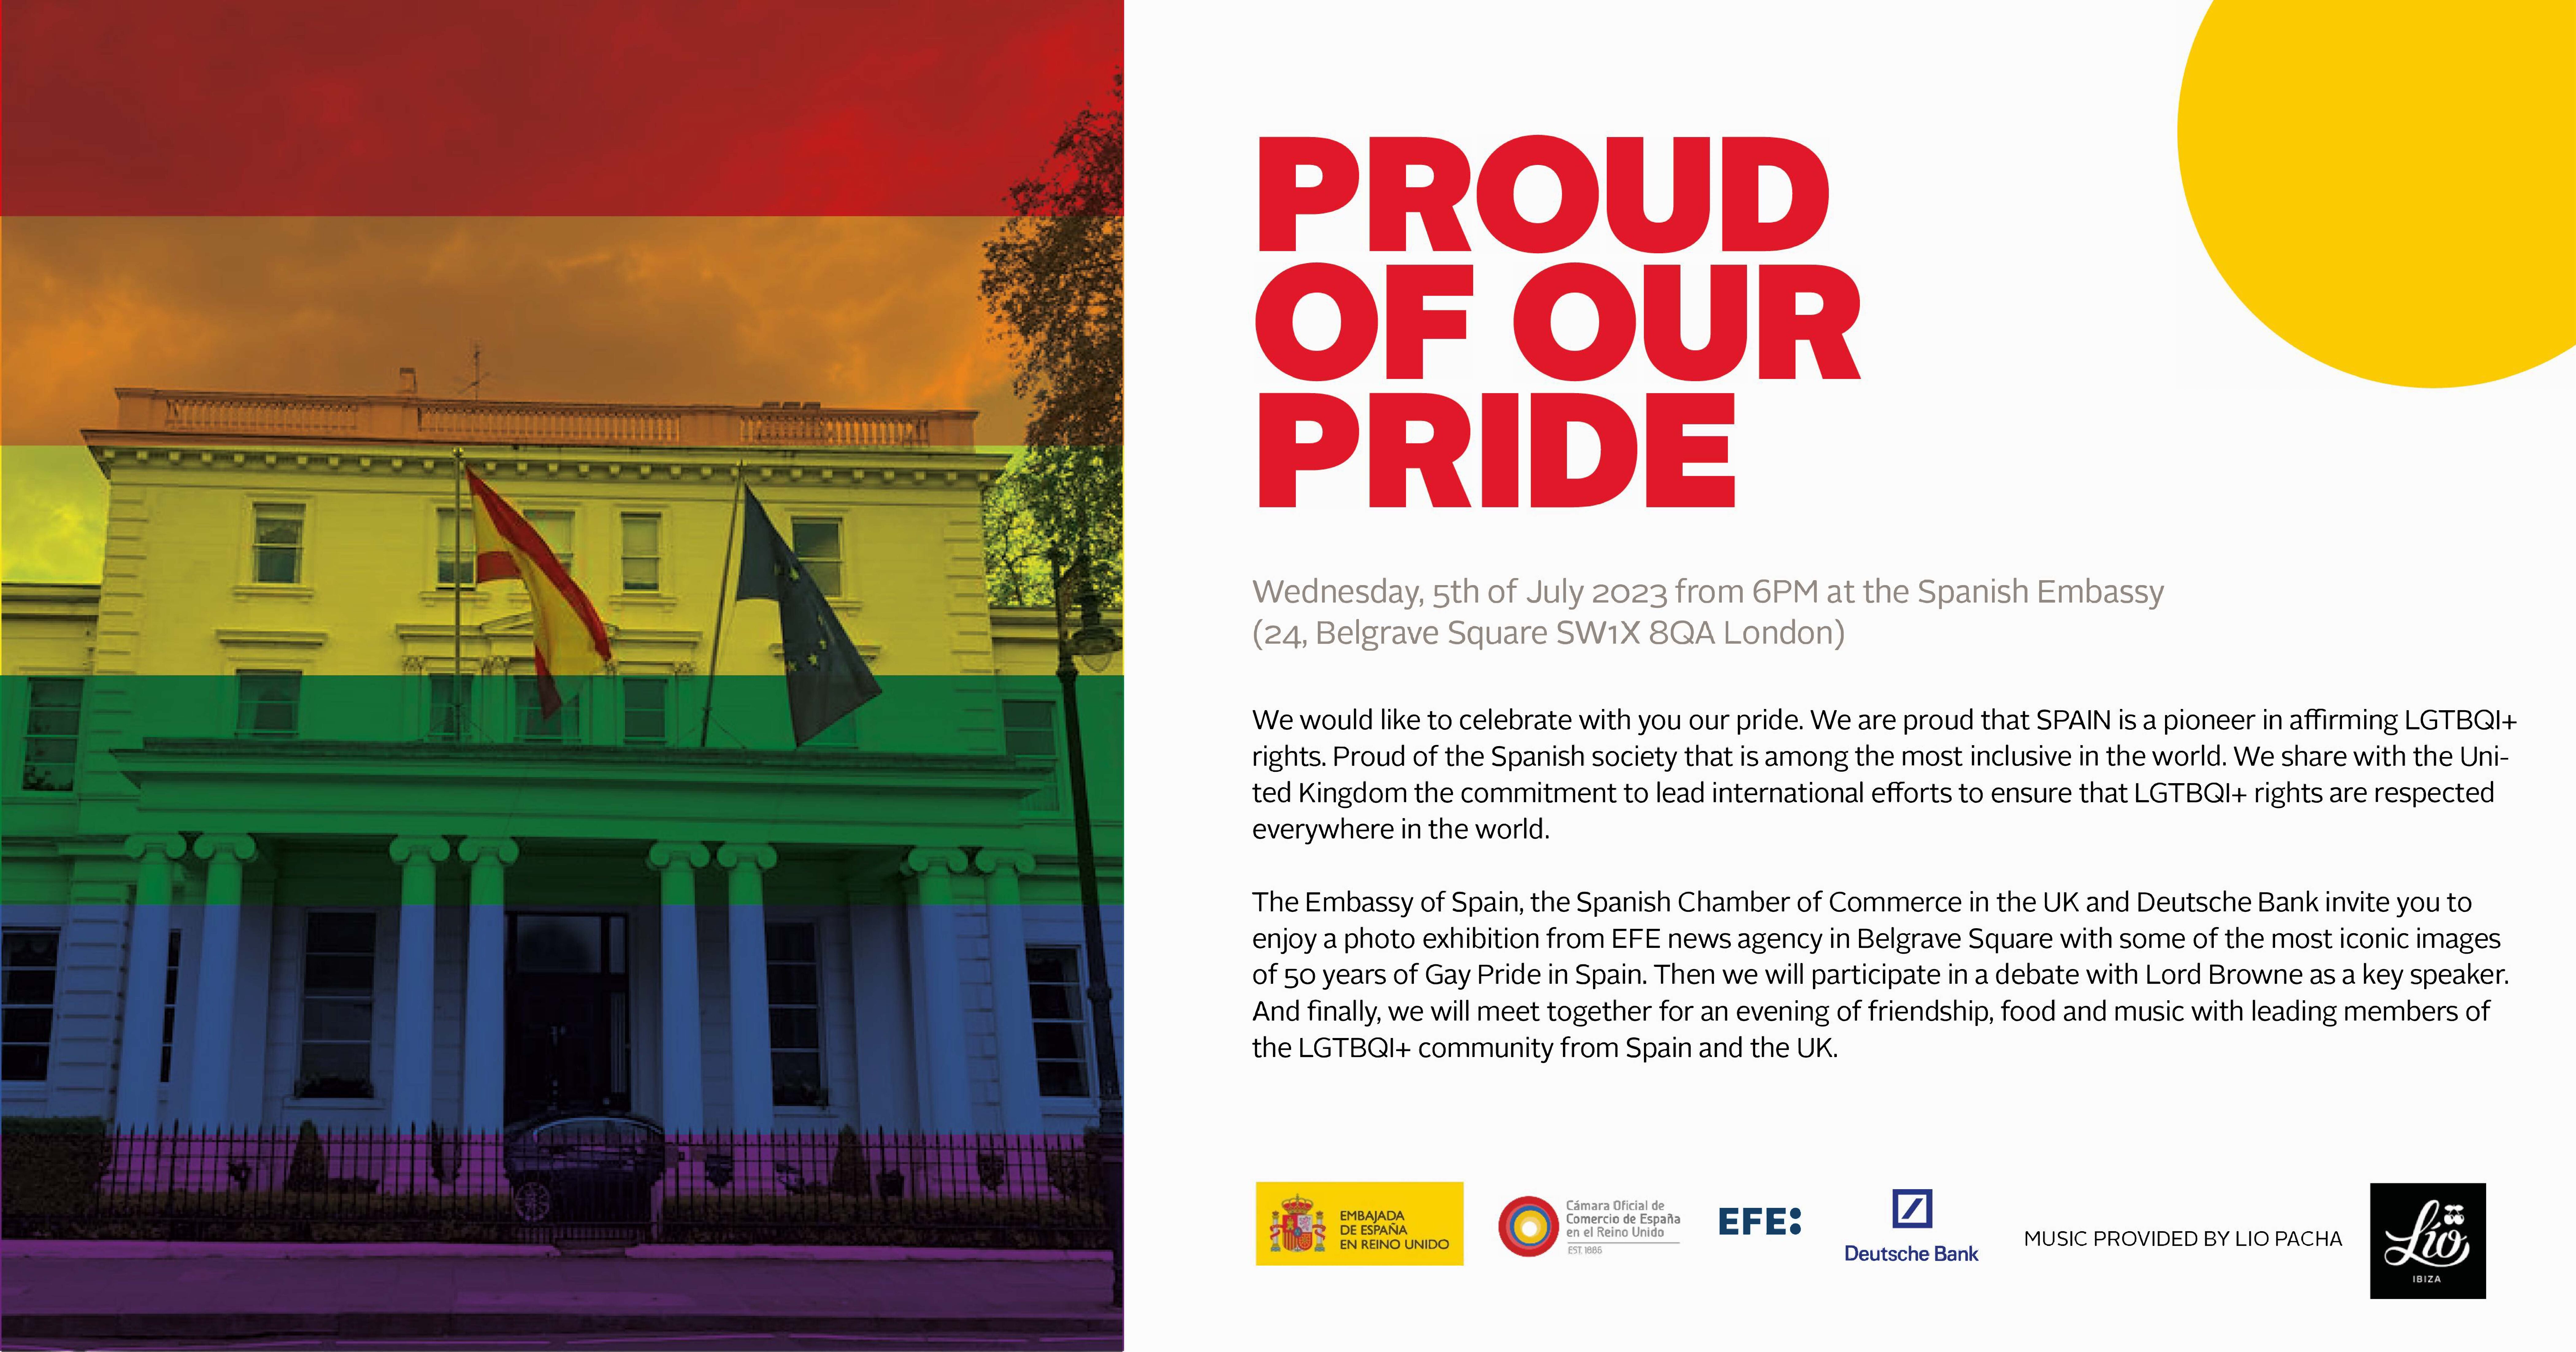 PROUD OF OUR PRIDE